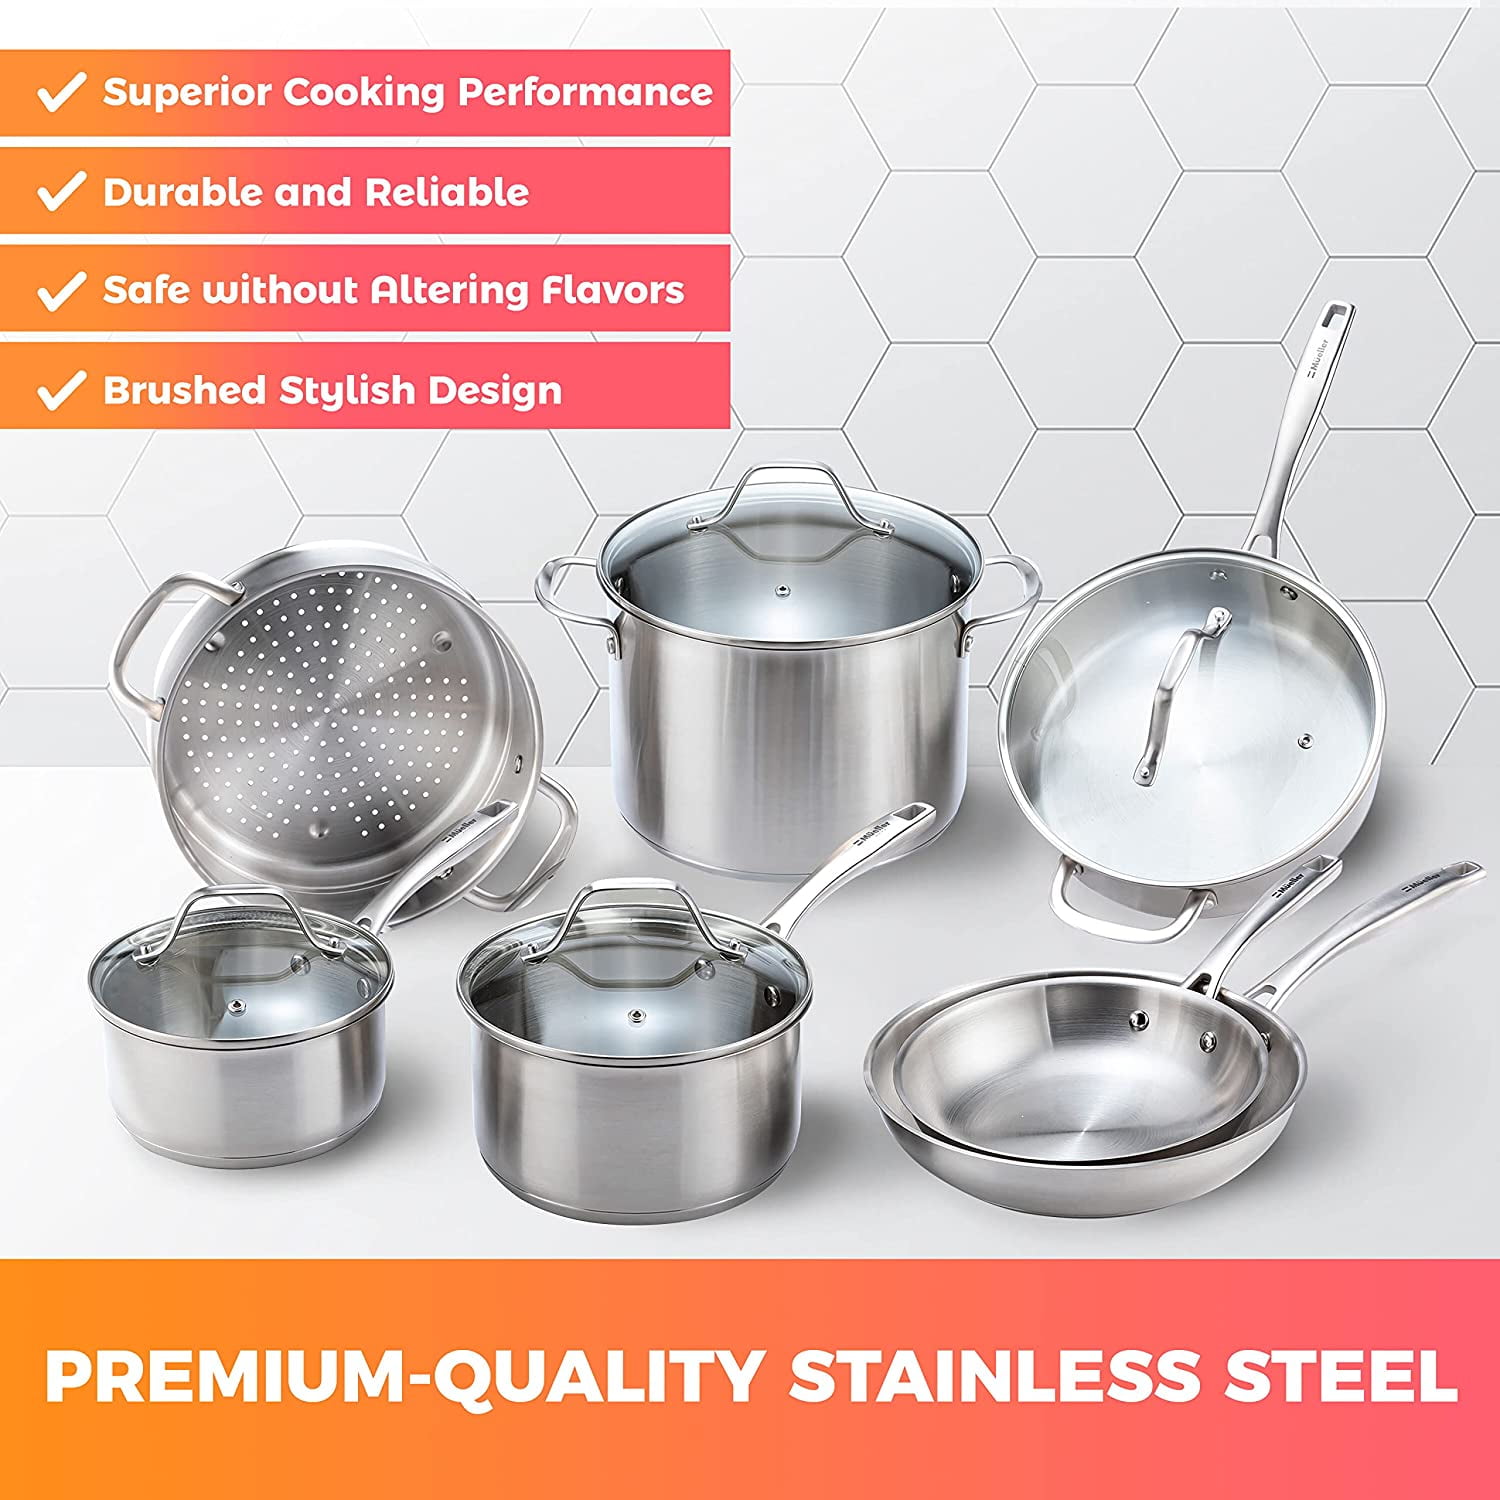 Professional Stainless Steel Pots and Pans Set, 17PC Induction